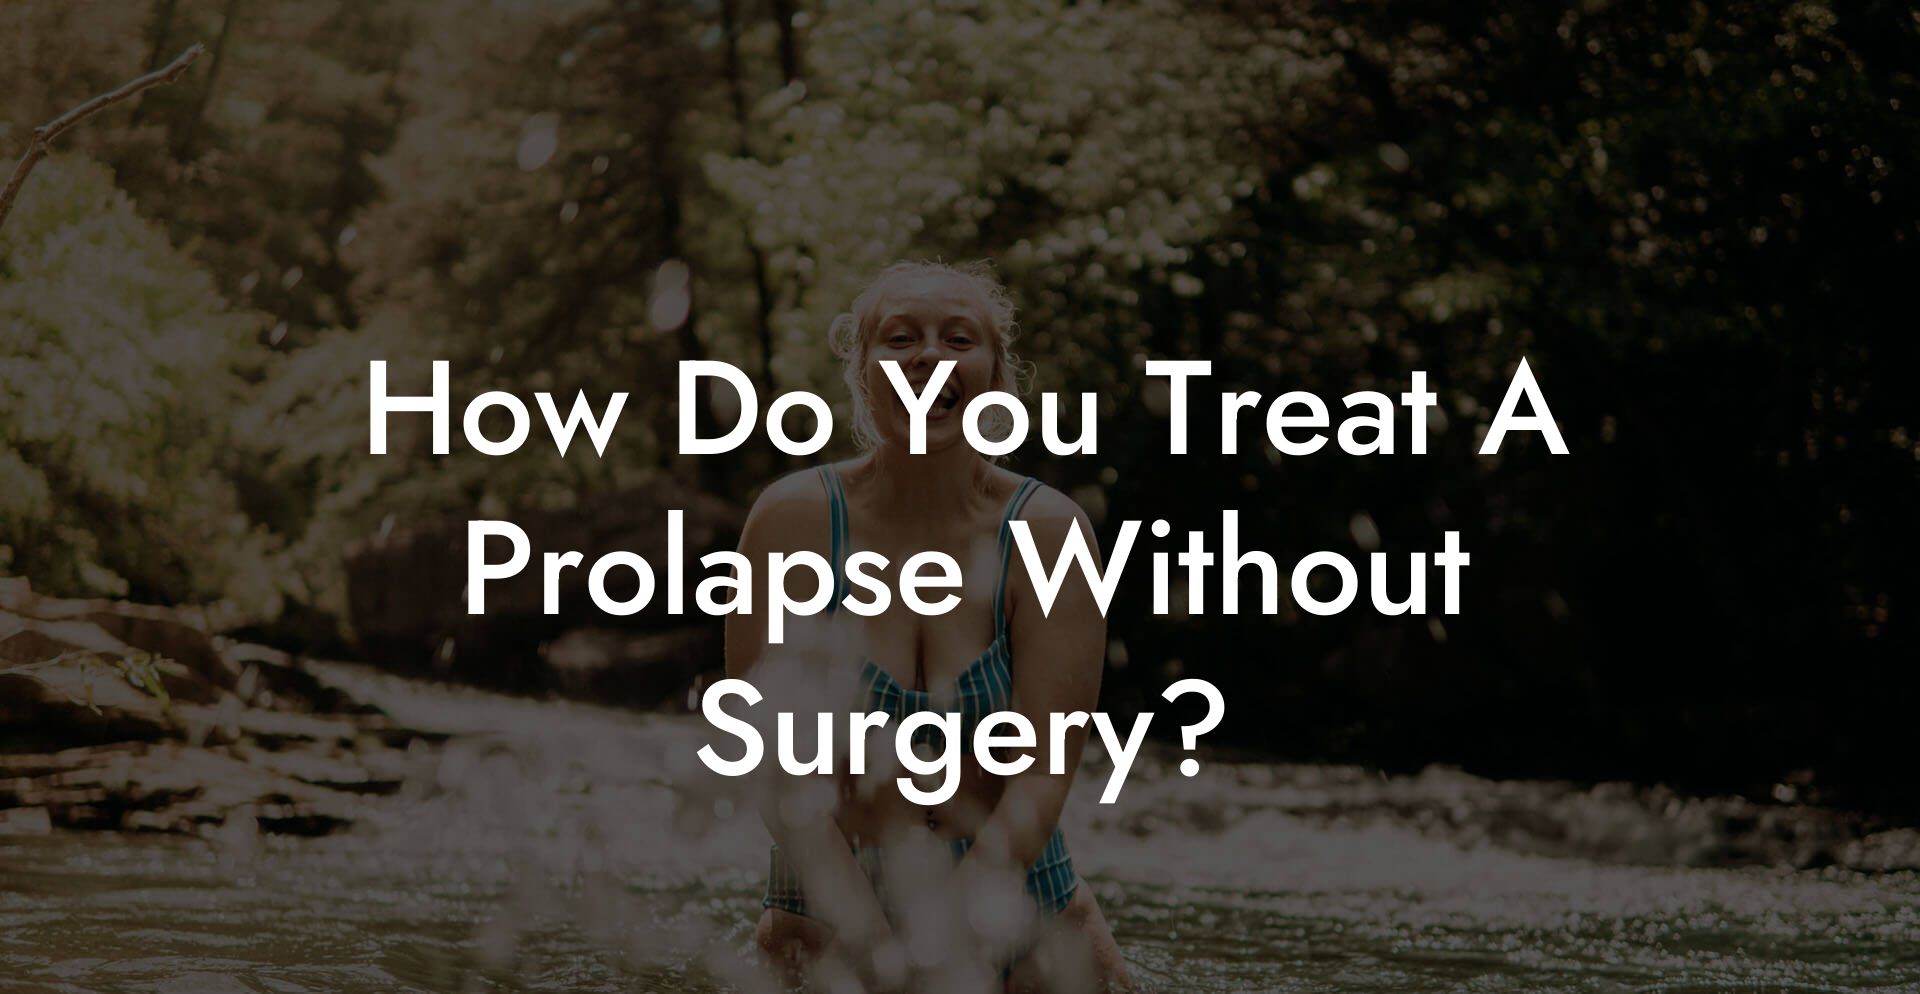 How Do You Treat A Prolapse Without Surgery?